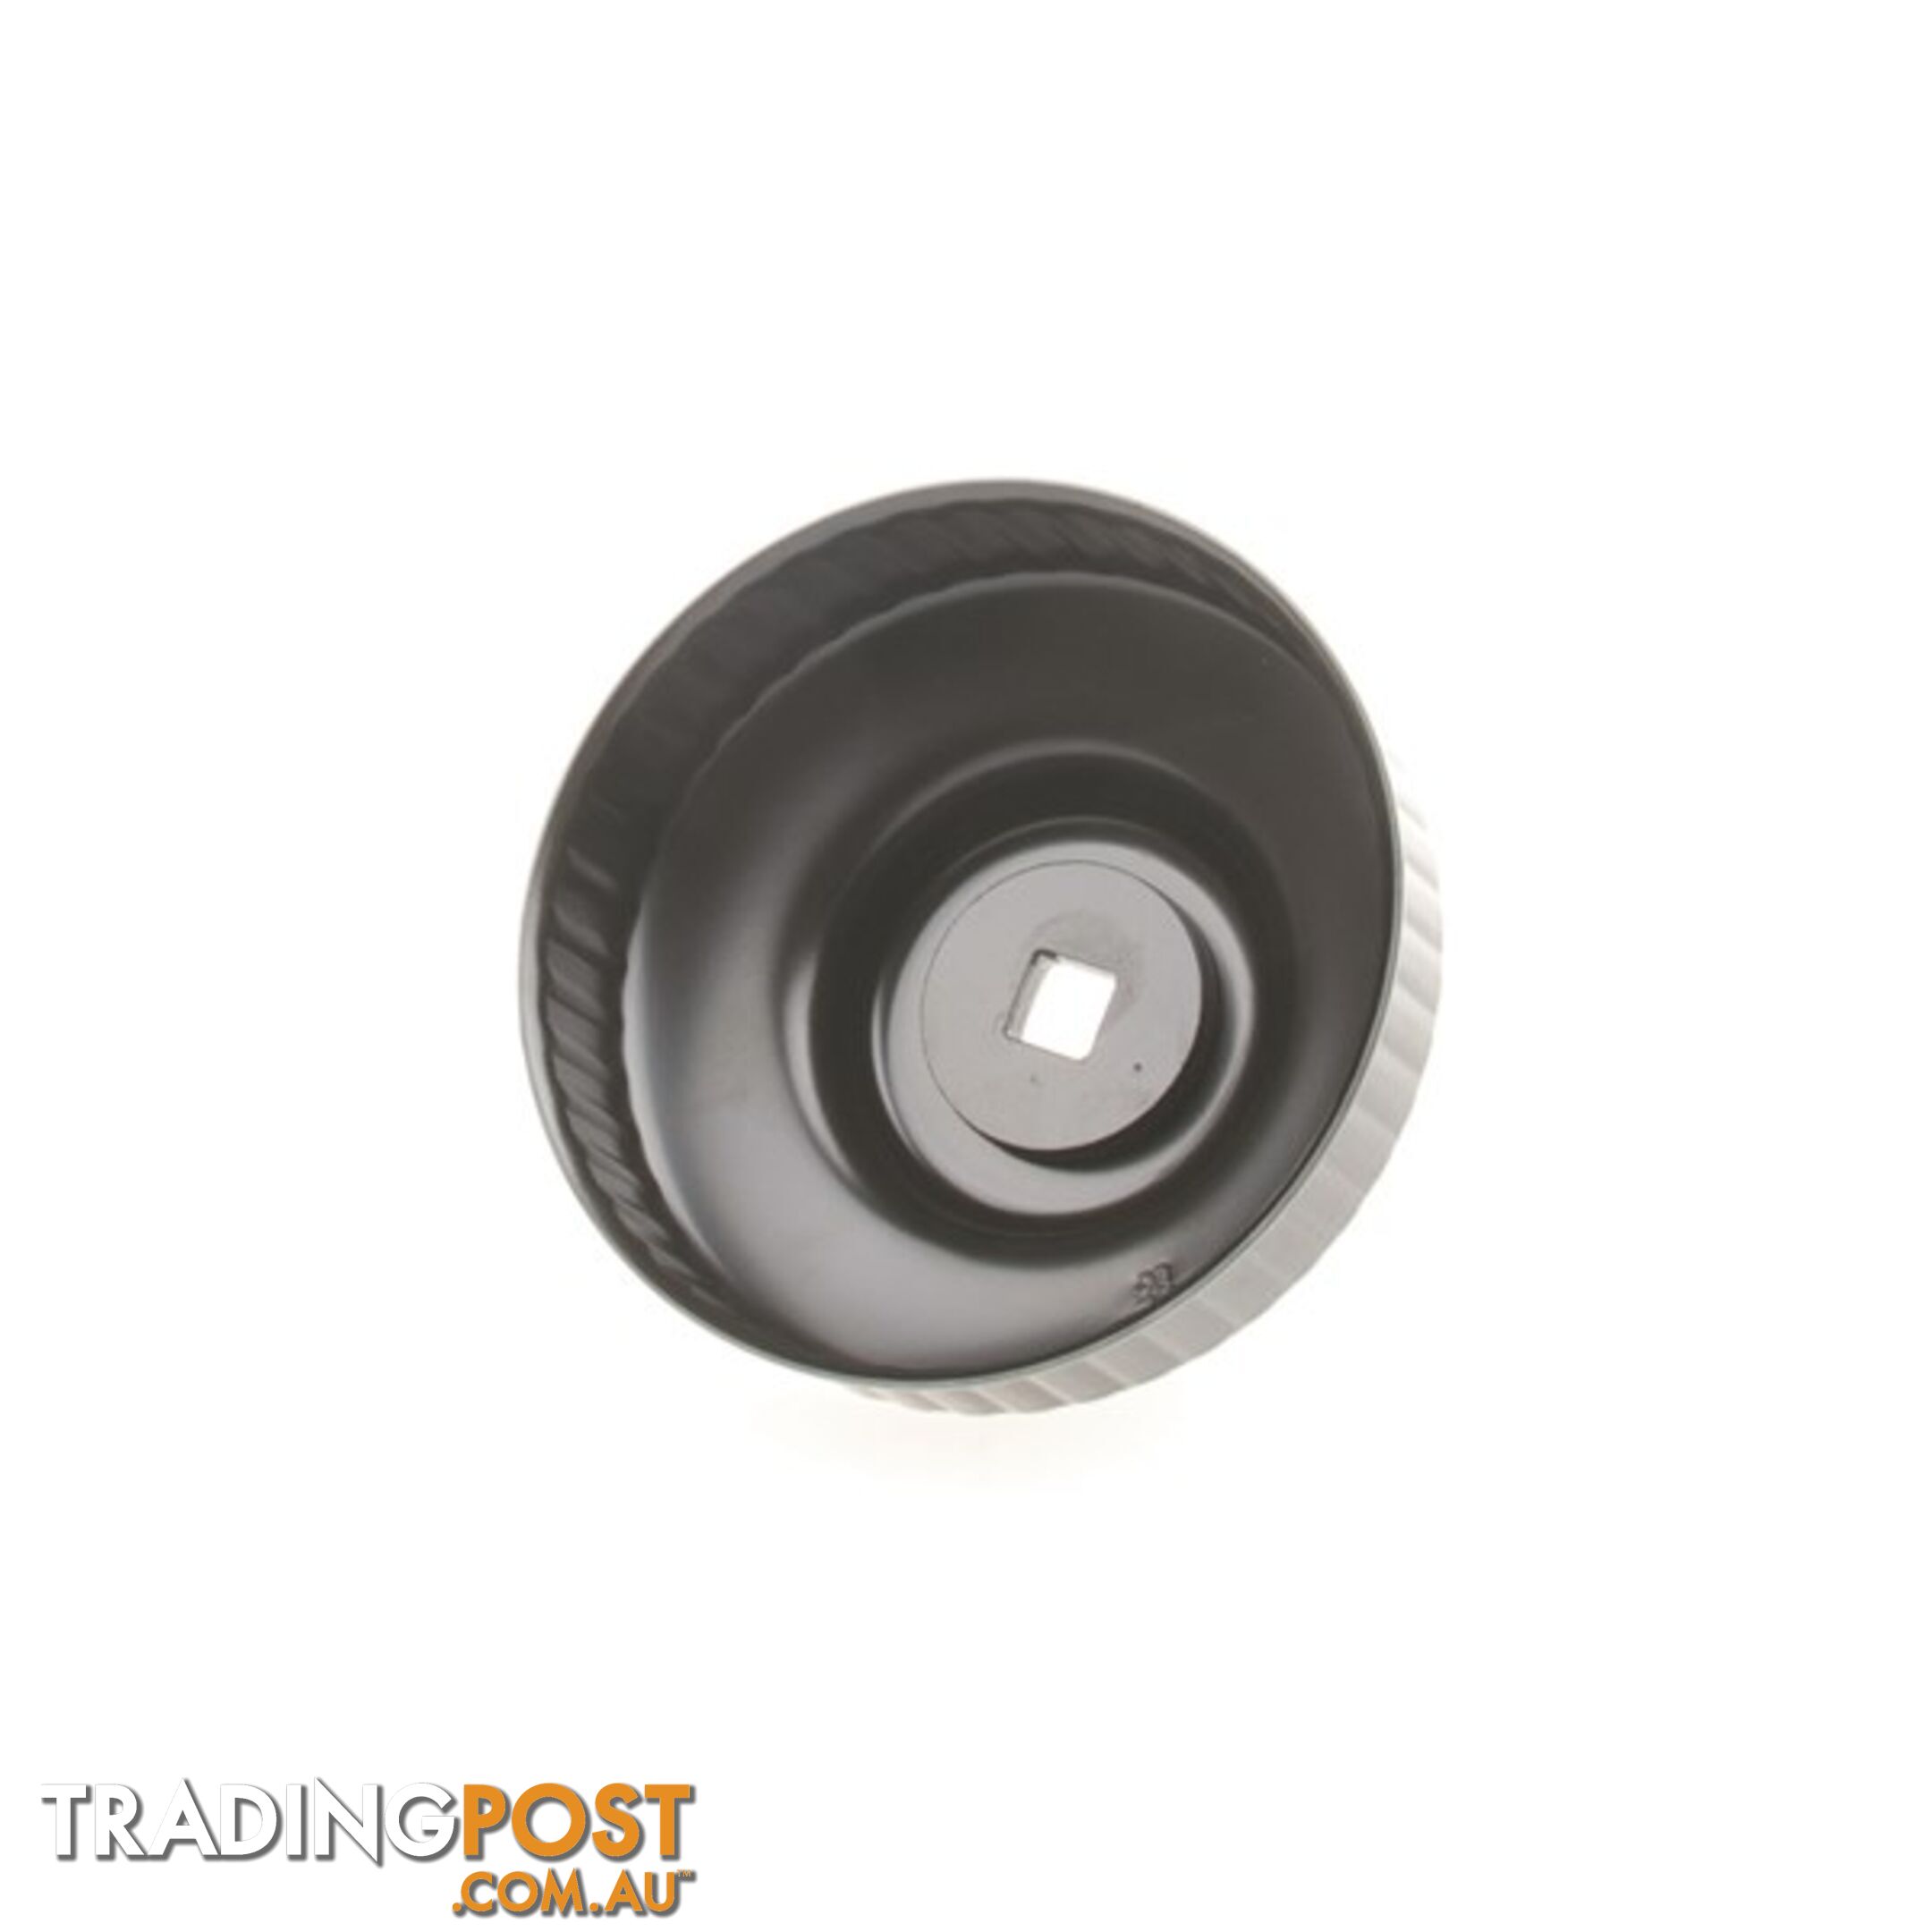 Oil Filter Cup Wrench  - 93mm 36 Flutes SKU - 305066